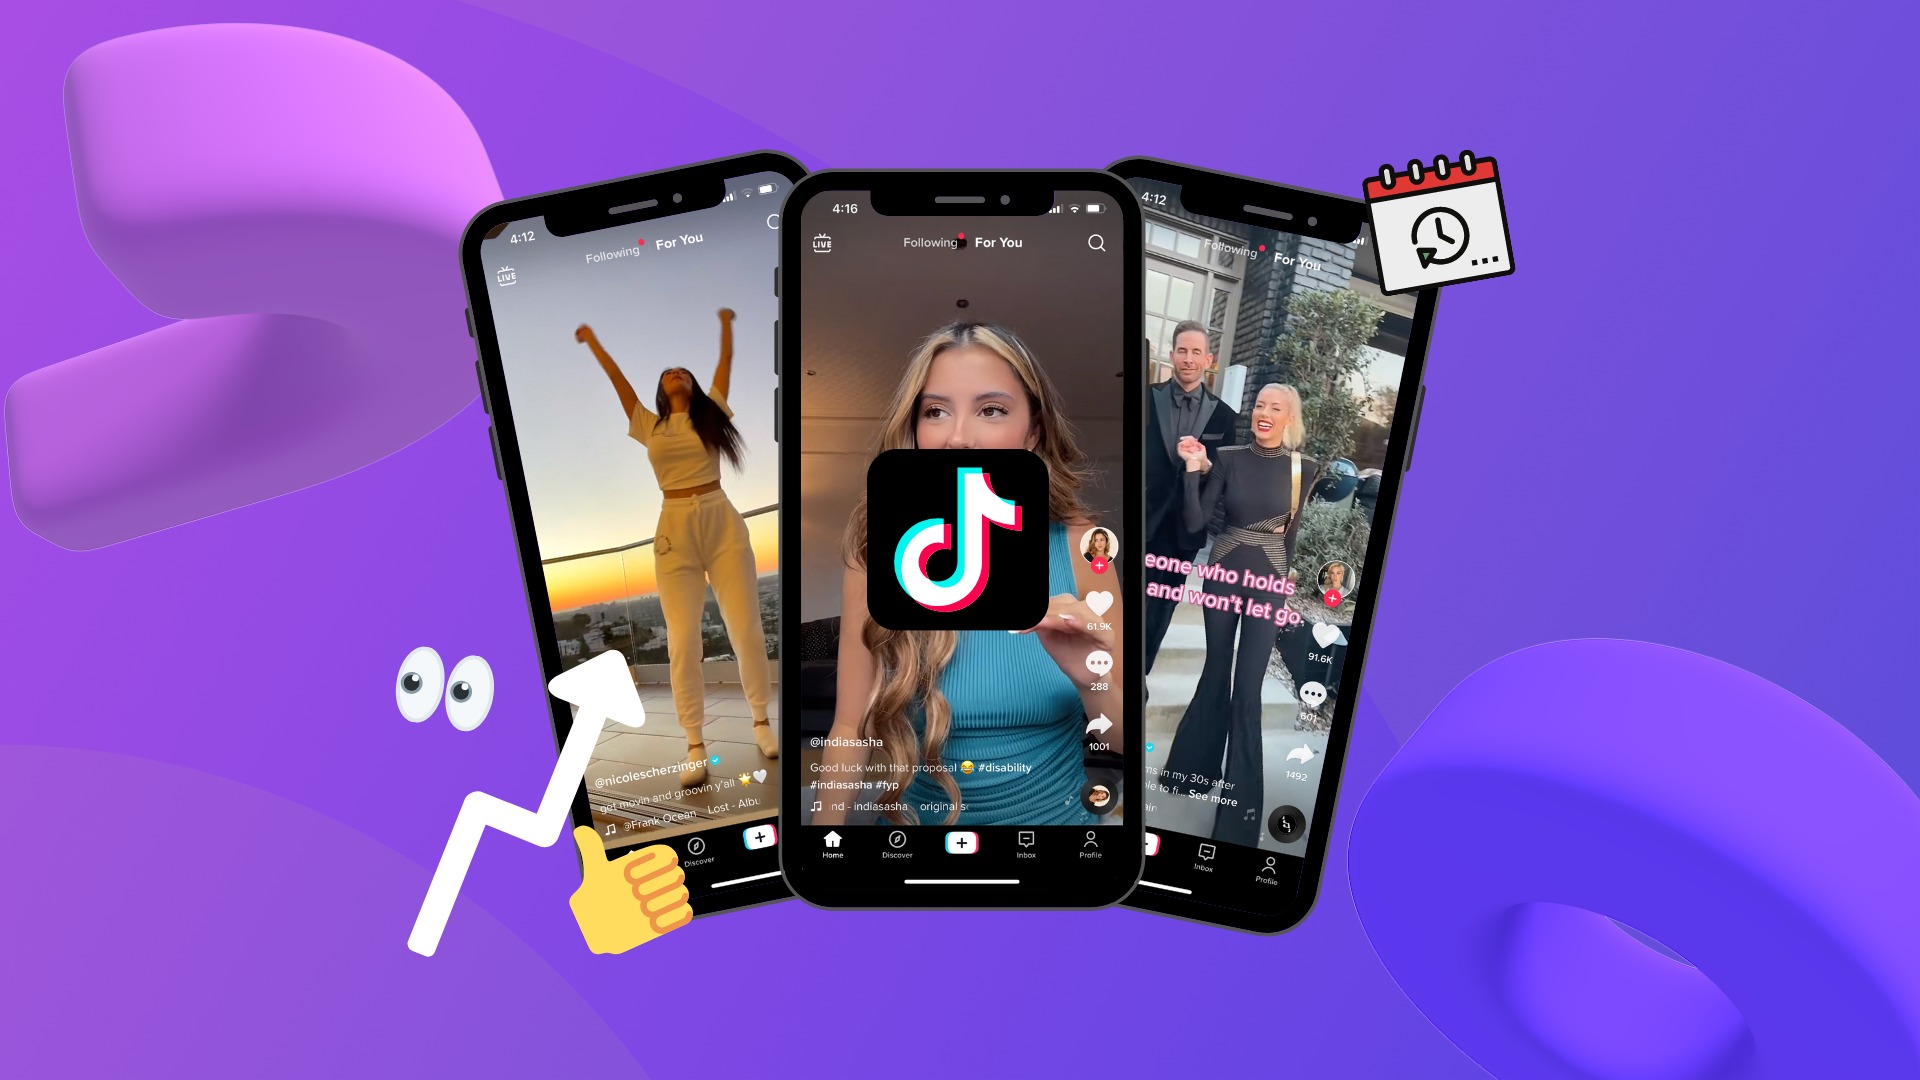 Today we are going to take a look at what does FNF mean on TikTok, its origin, and its usage. This article will tell you all you need to know about this trend.